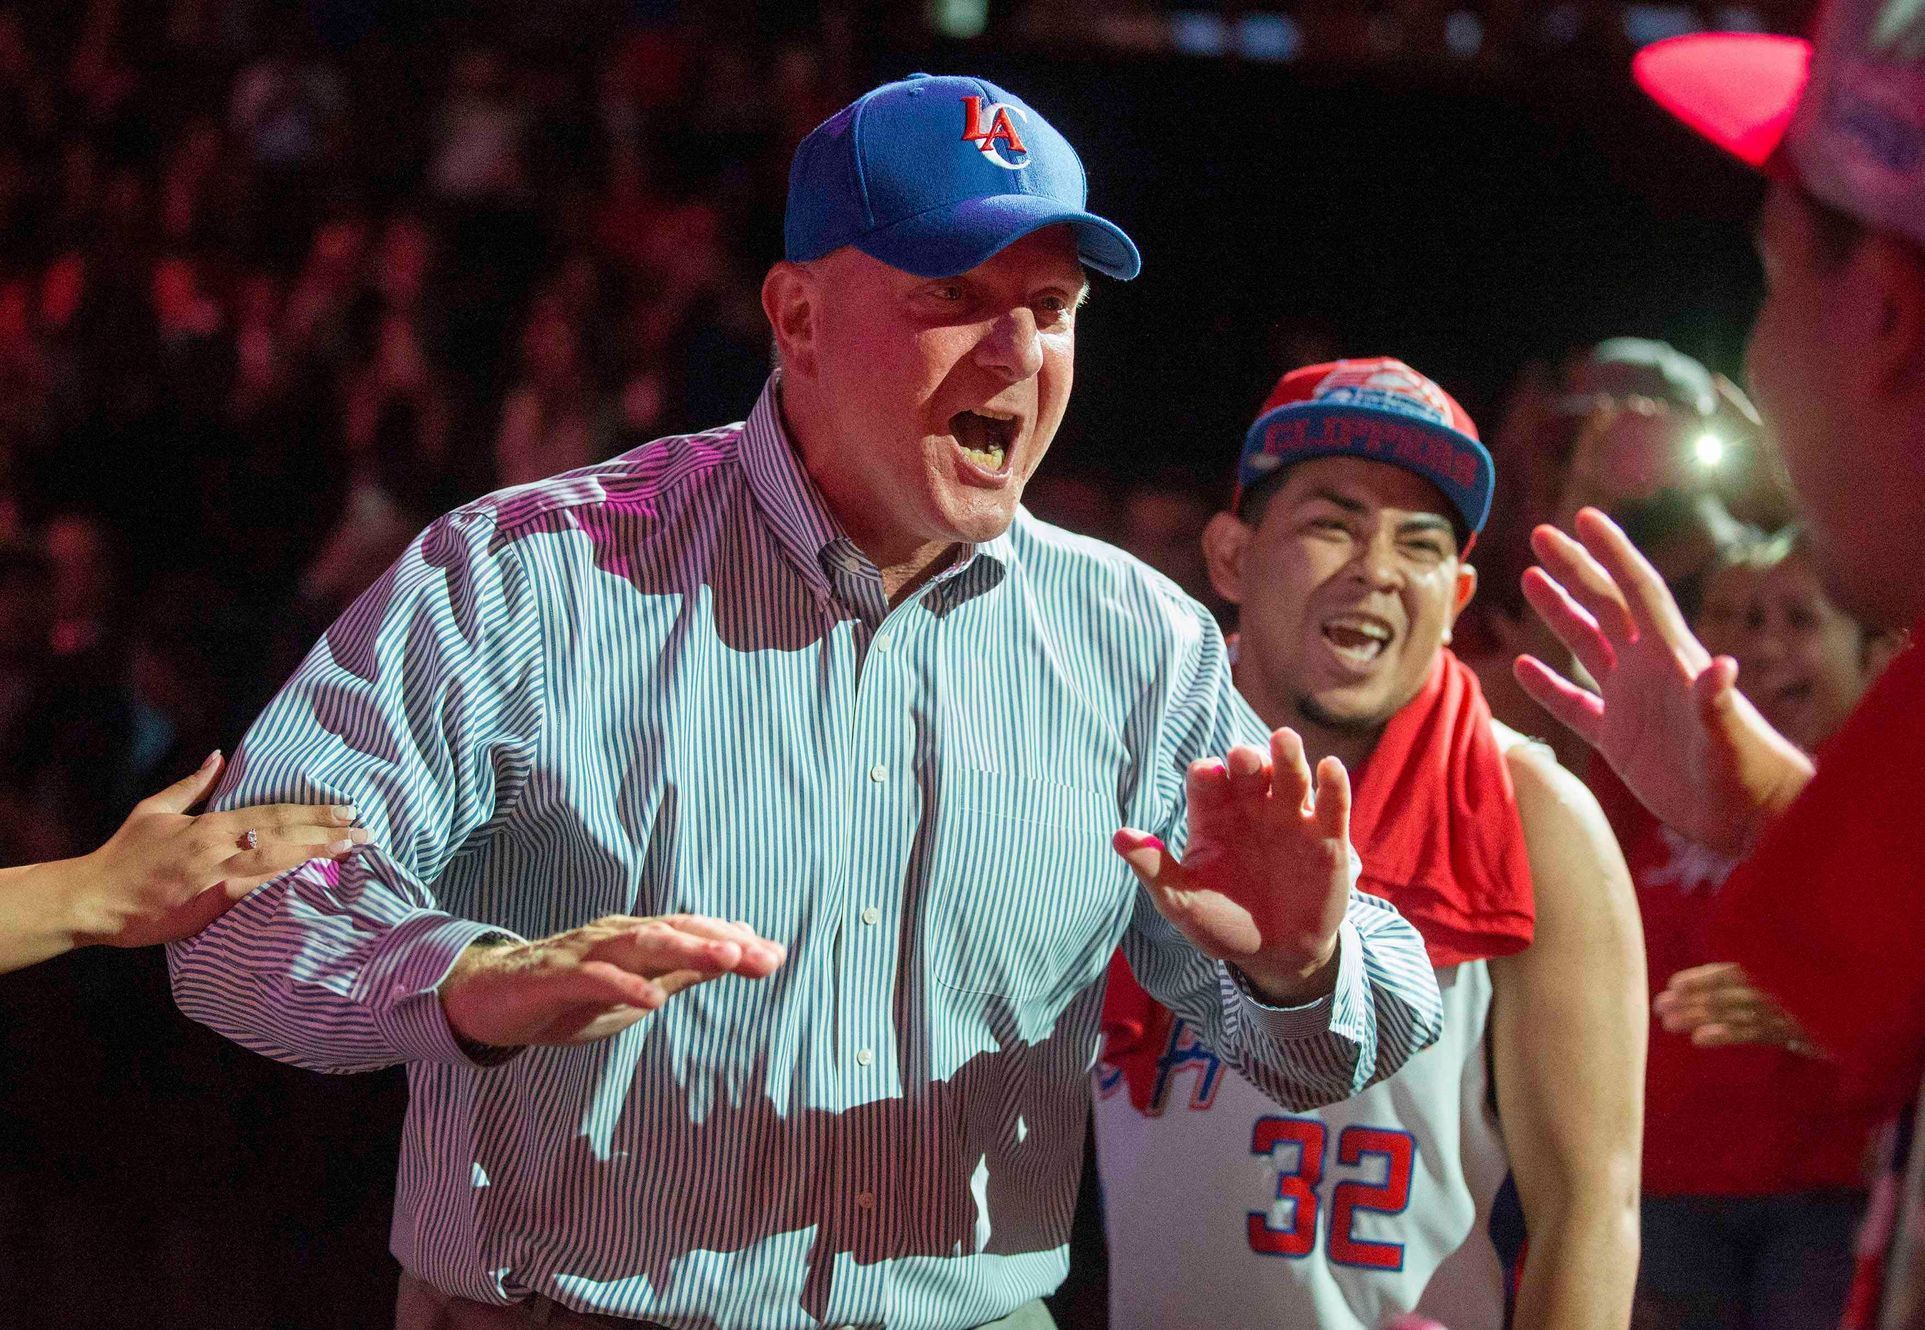 Los Angeles Clippers' new owner Ballmer is introduced at a fan event at the Staples Center in Los Angeles